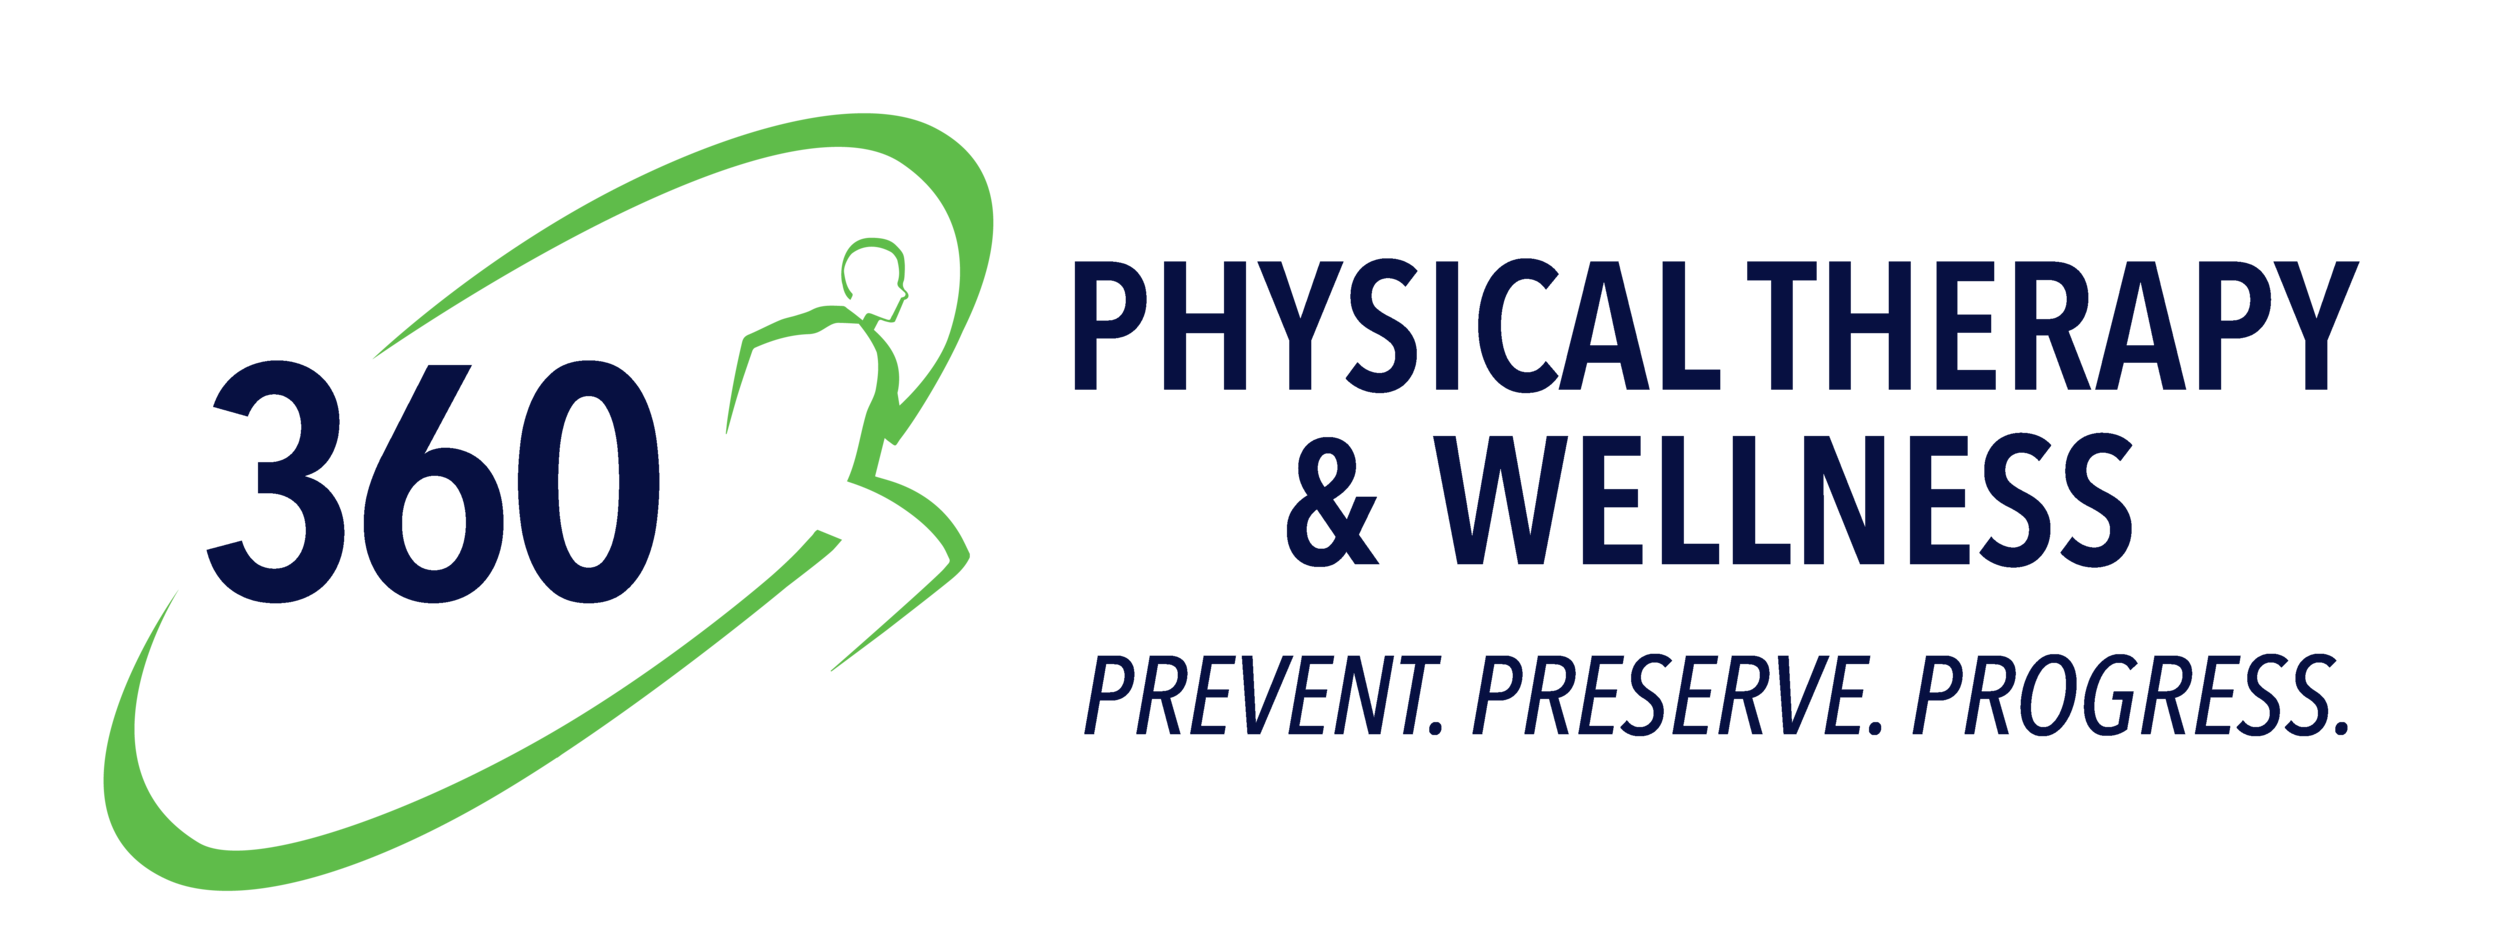 360 Physical Therapy and Wellness in Fulton, MD